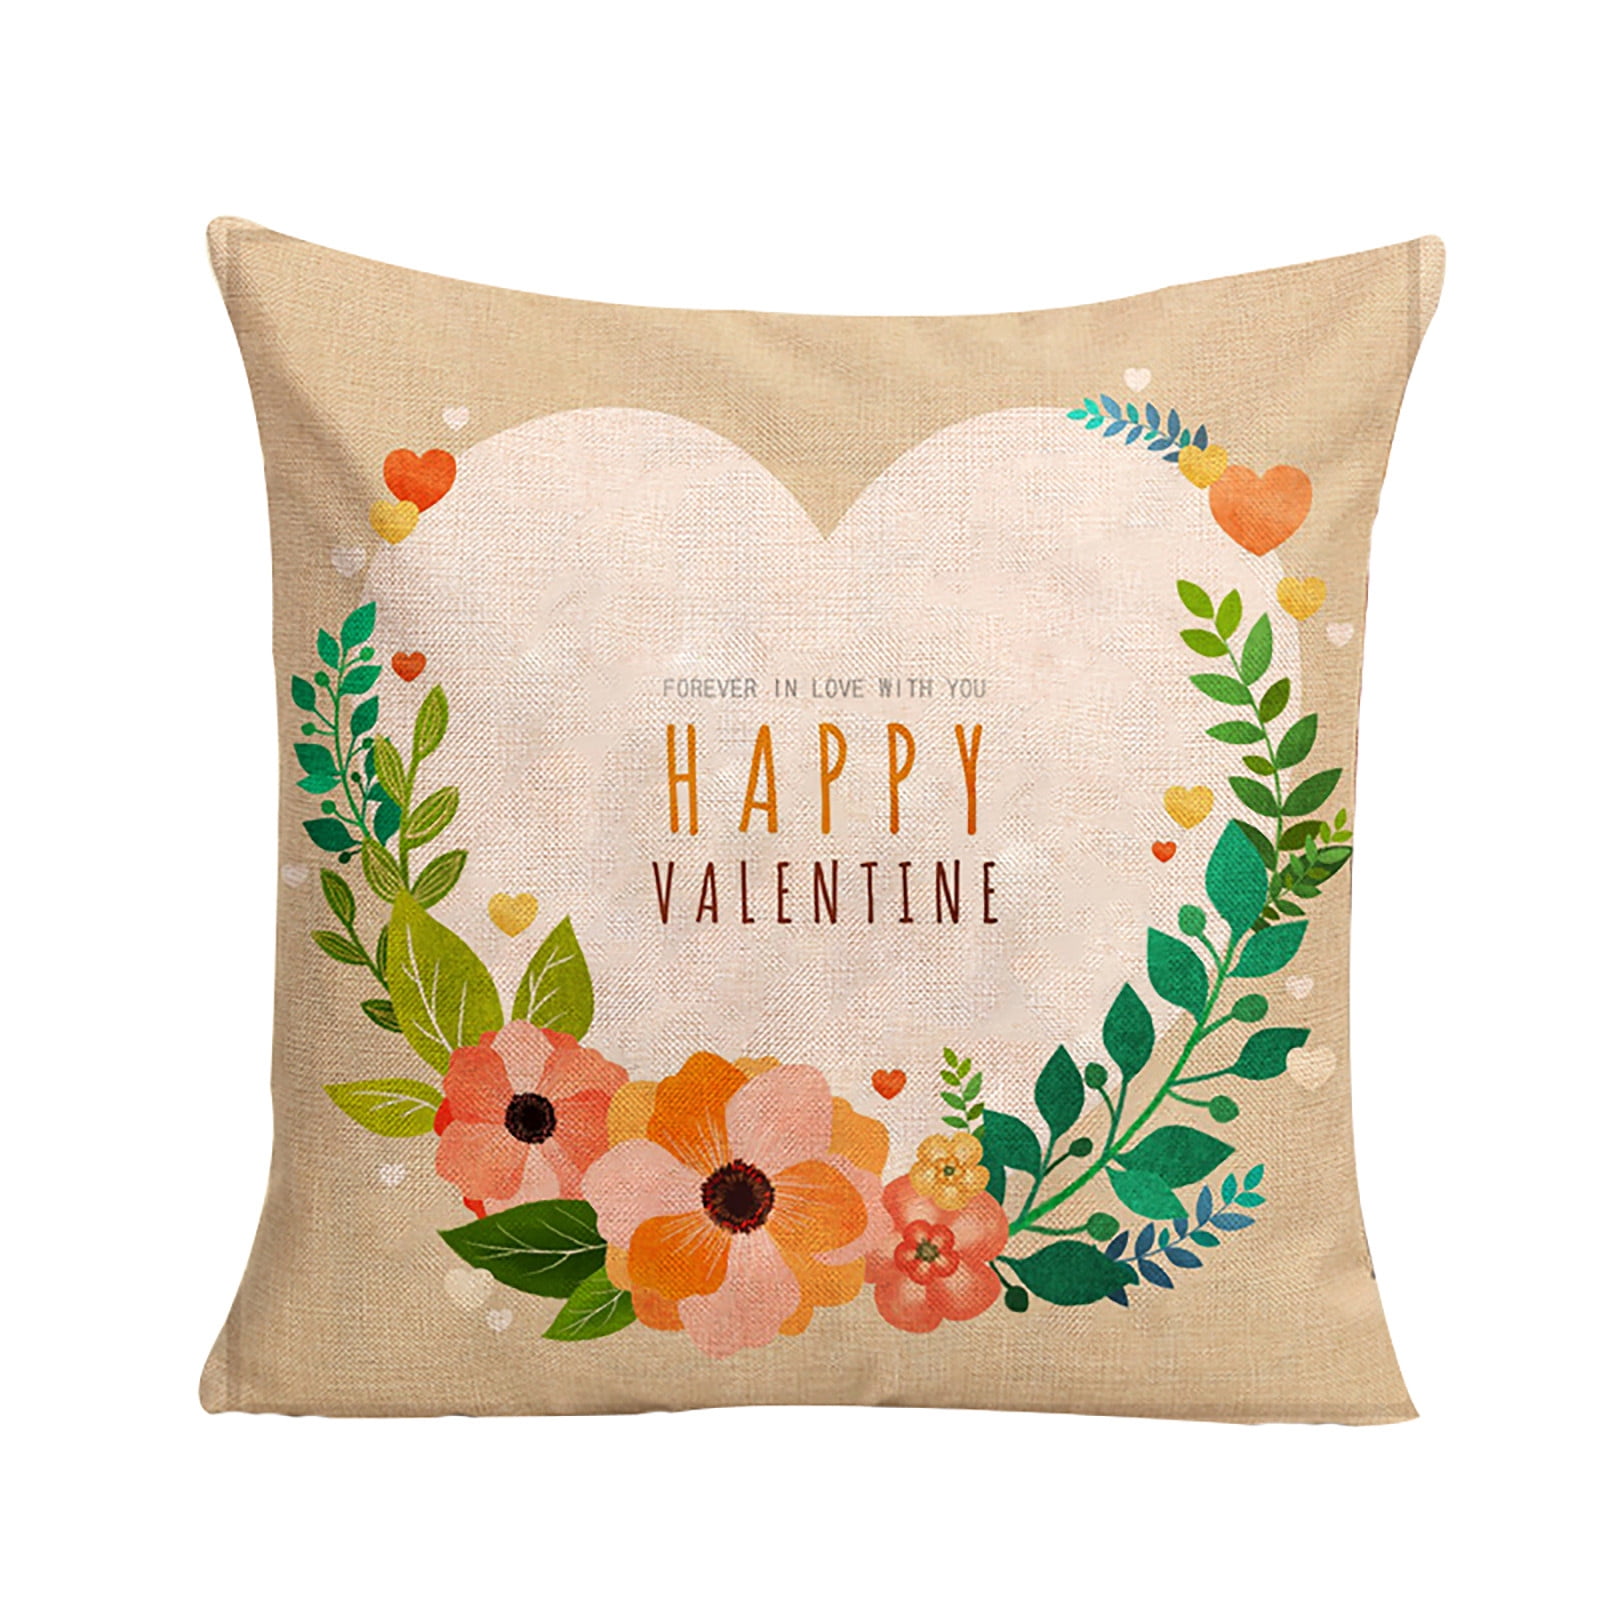 Happy Valentine's Day Throw Cushion Pillow Case Sweet Love Square Cushion Cover 